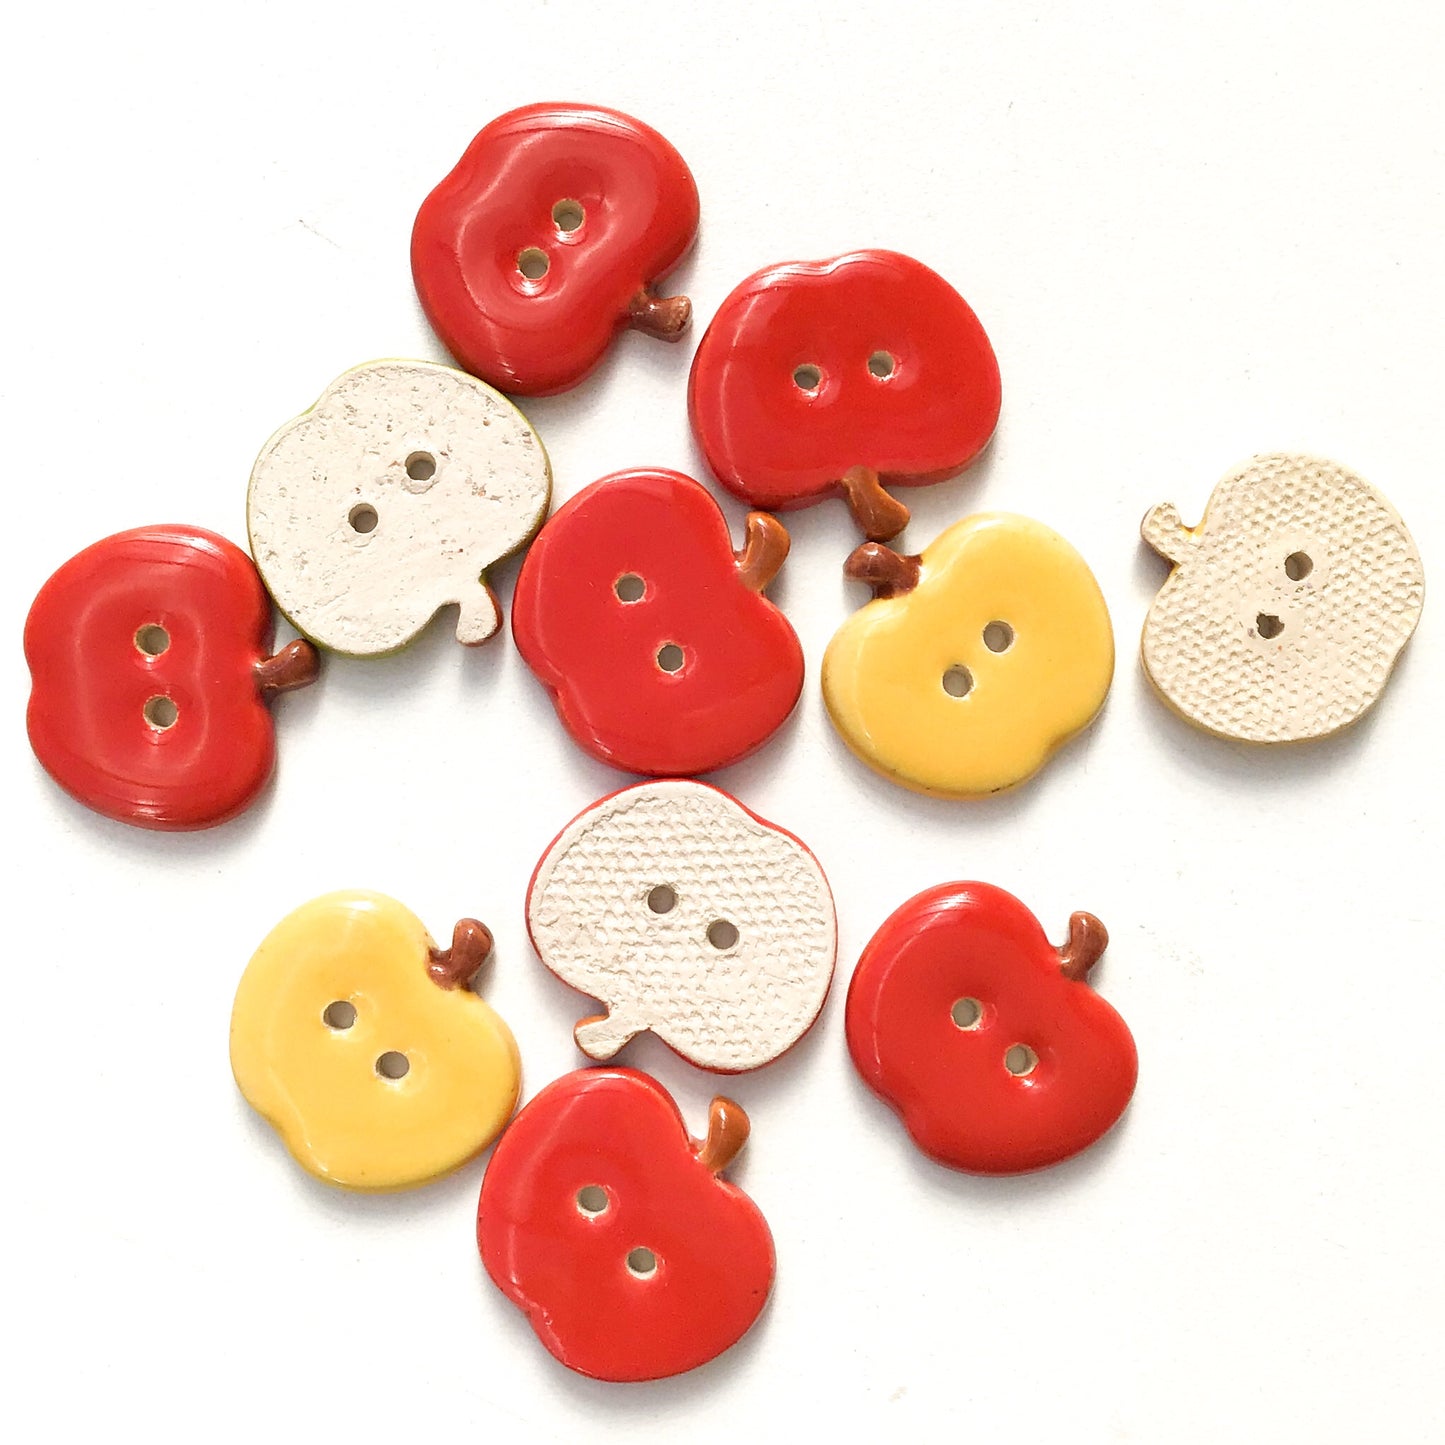 Ceramic Apple Buttons: Red, Yellow, and Green Ceramic Buttons - Clay Apple Buttons (ws-31)